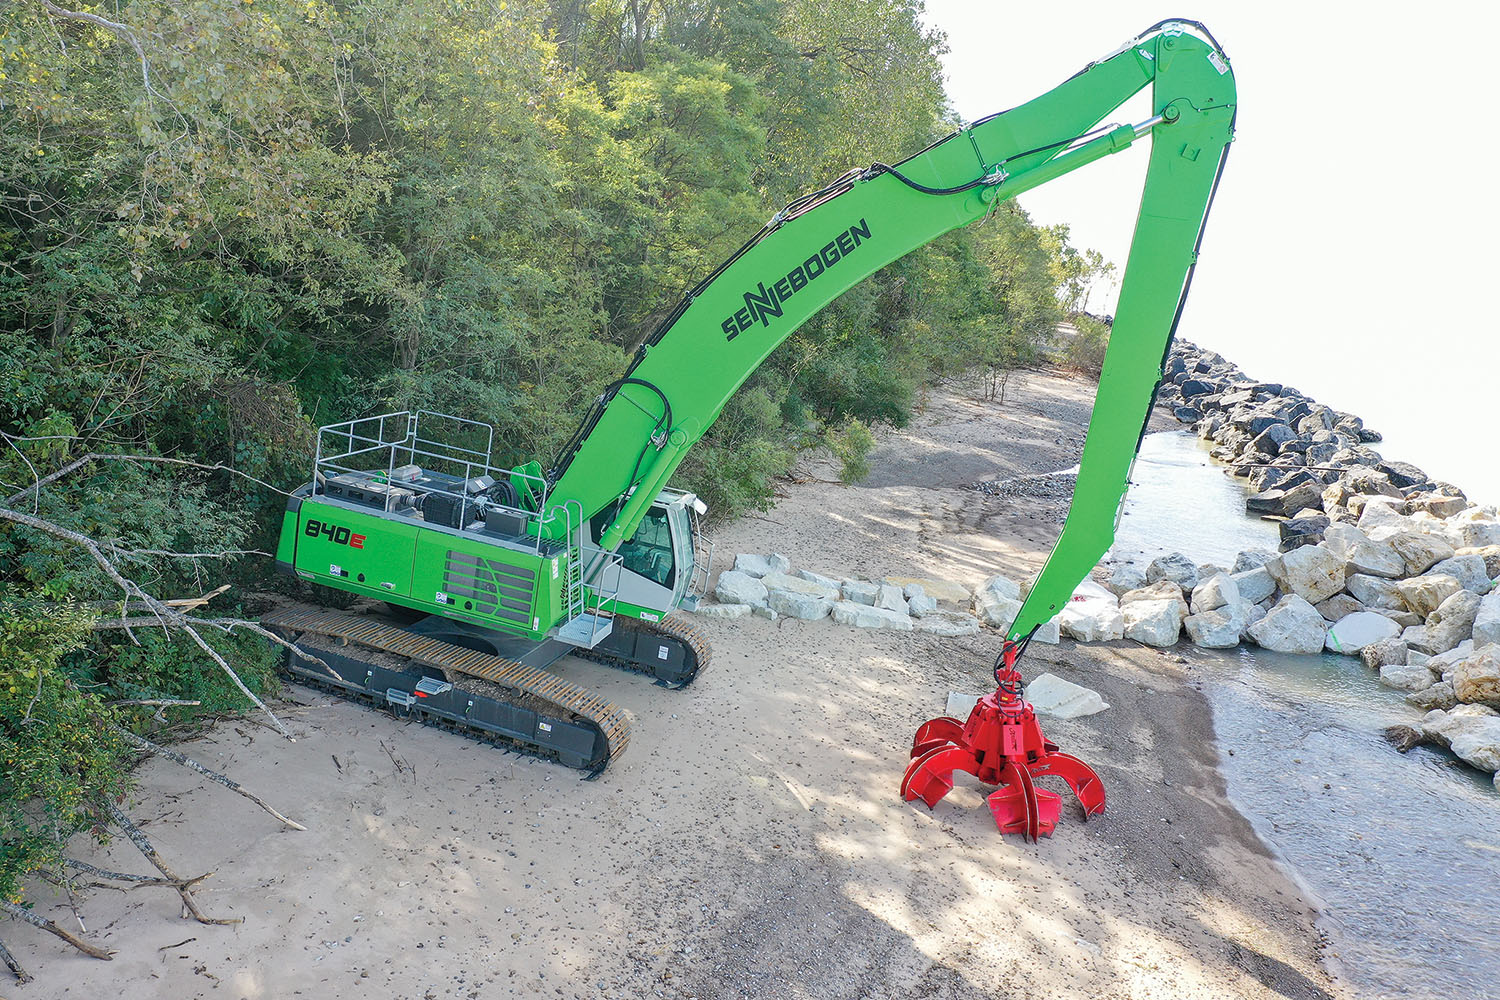 GLDM’s Sennebogen 840 R-HD is outfitted with a banana boom that can be equipped with either a clamshell bucket, a four-tine grappy or a hook